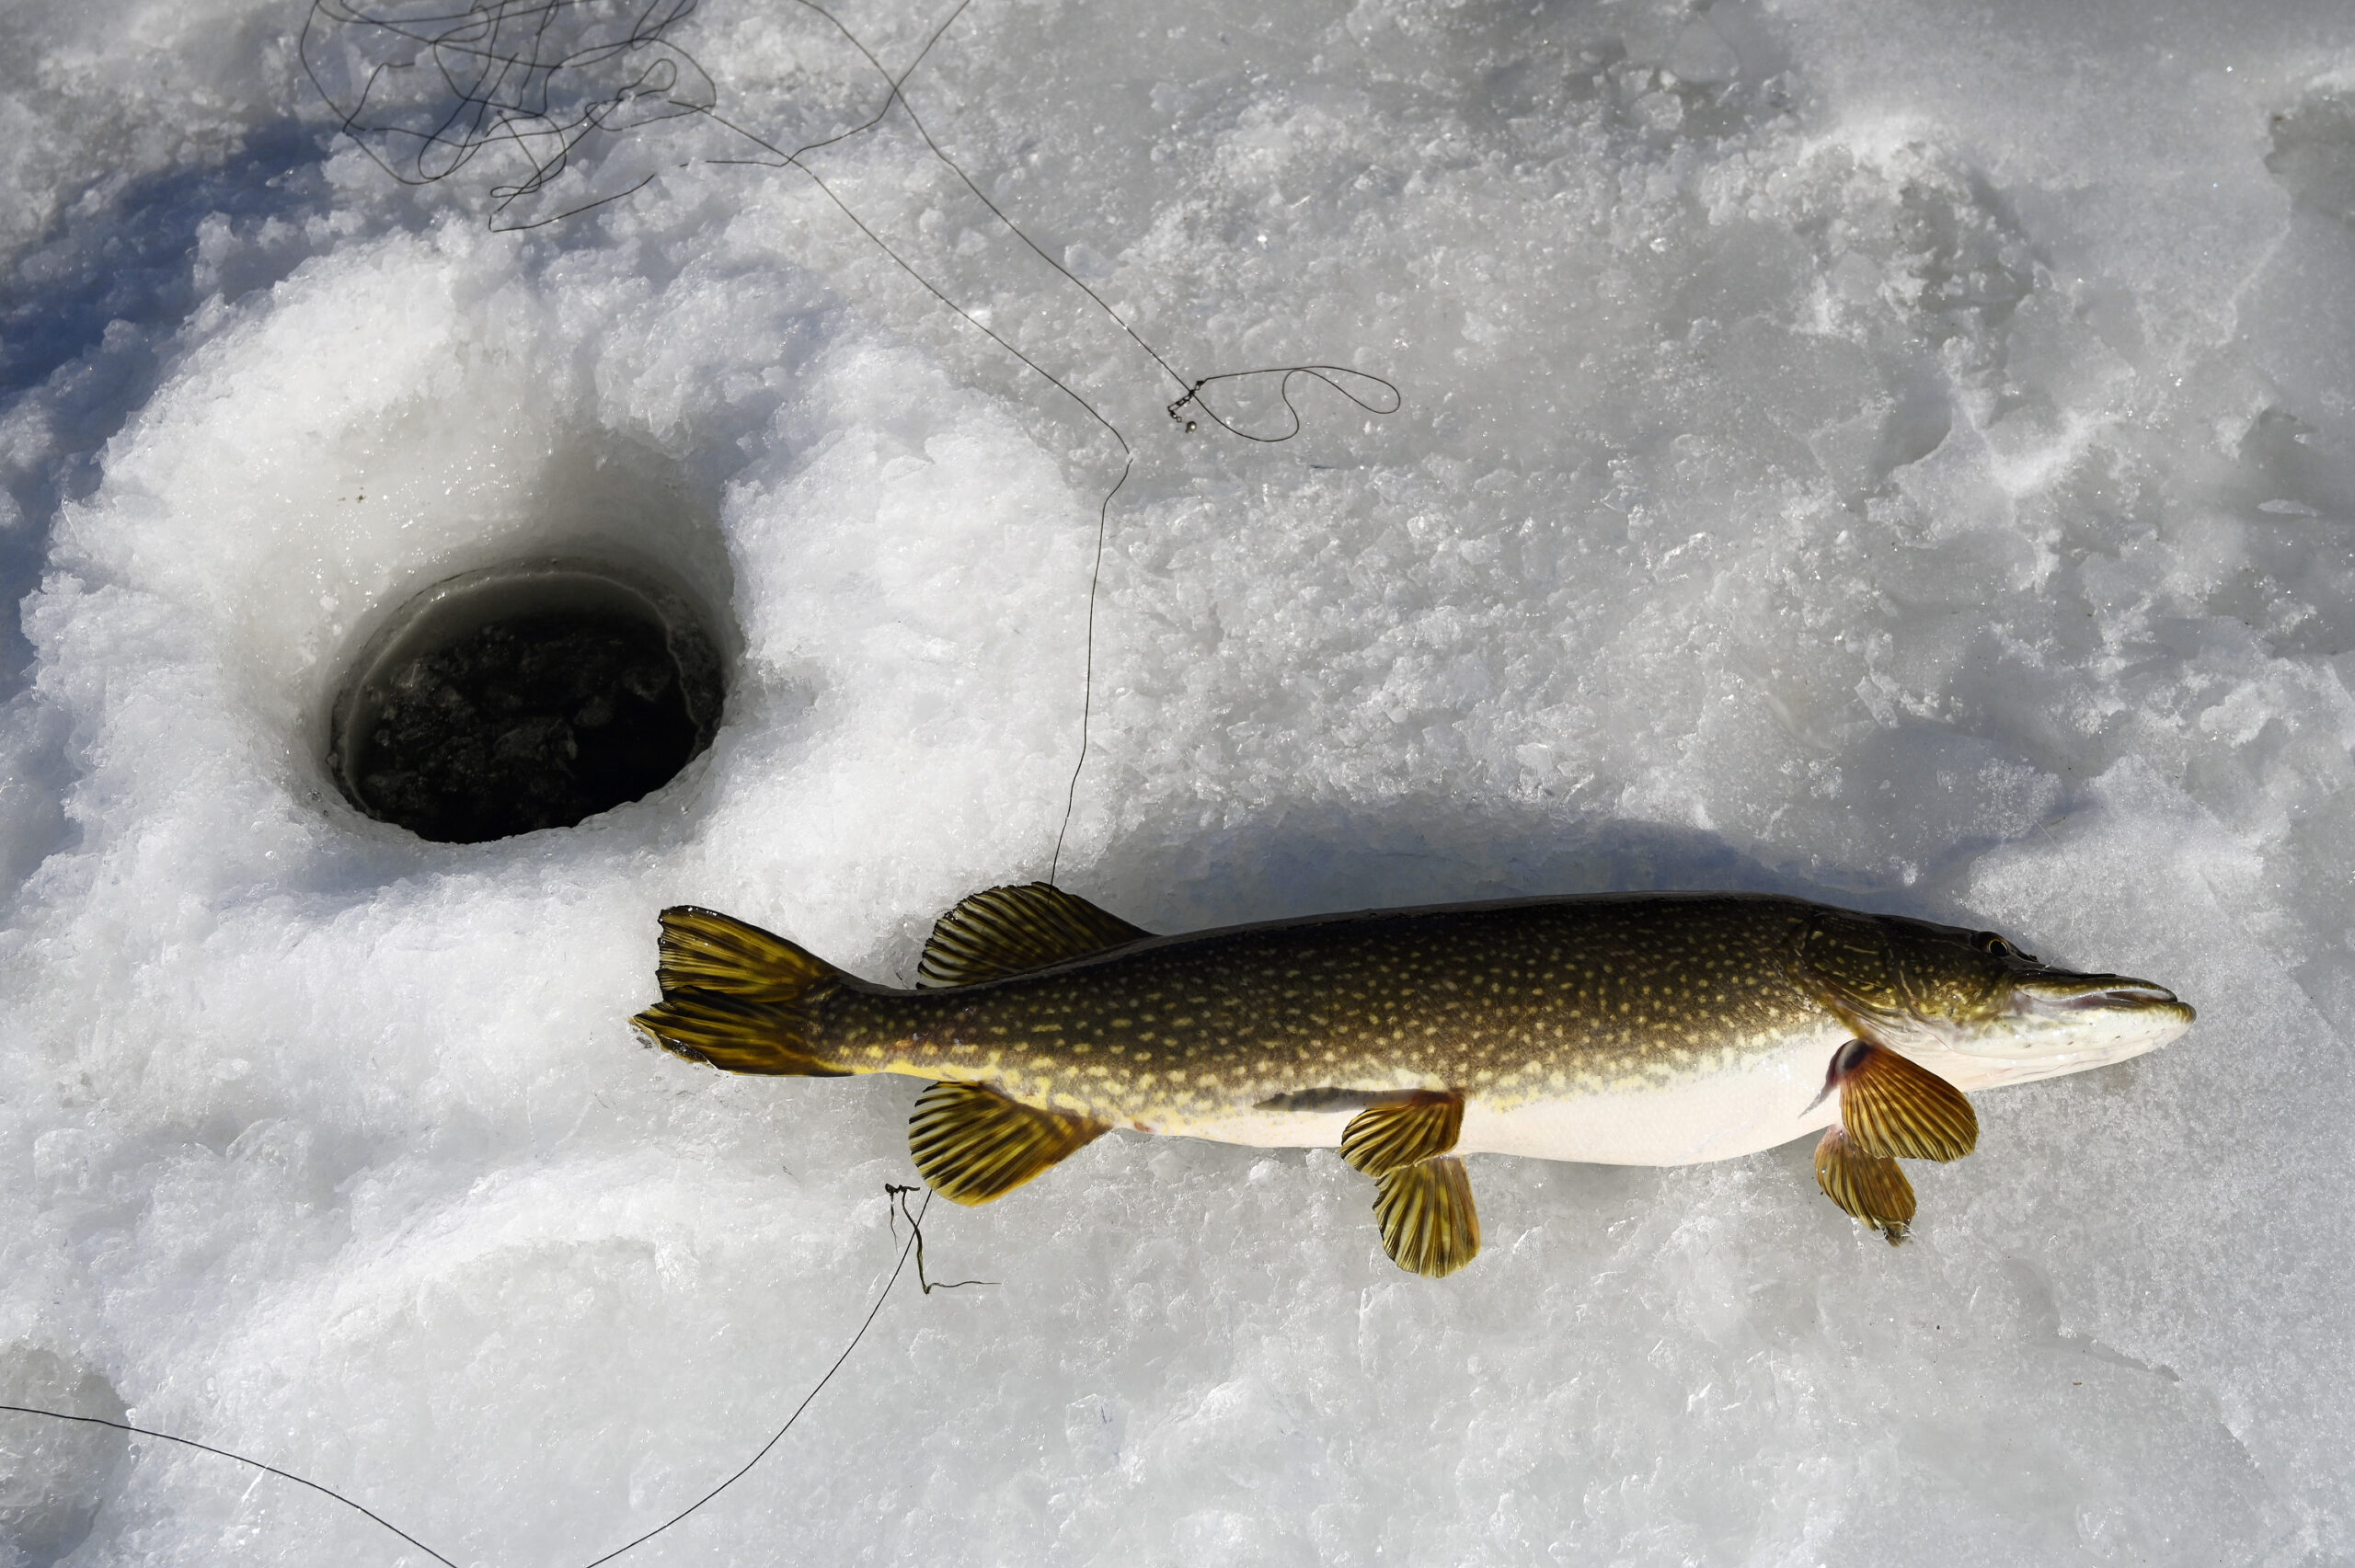 A fat pike on the ice.